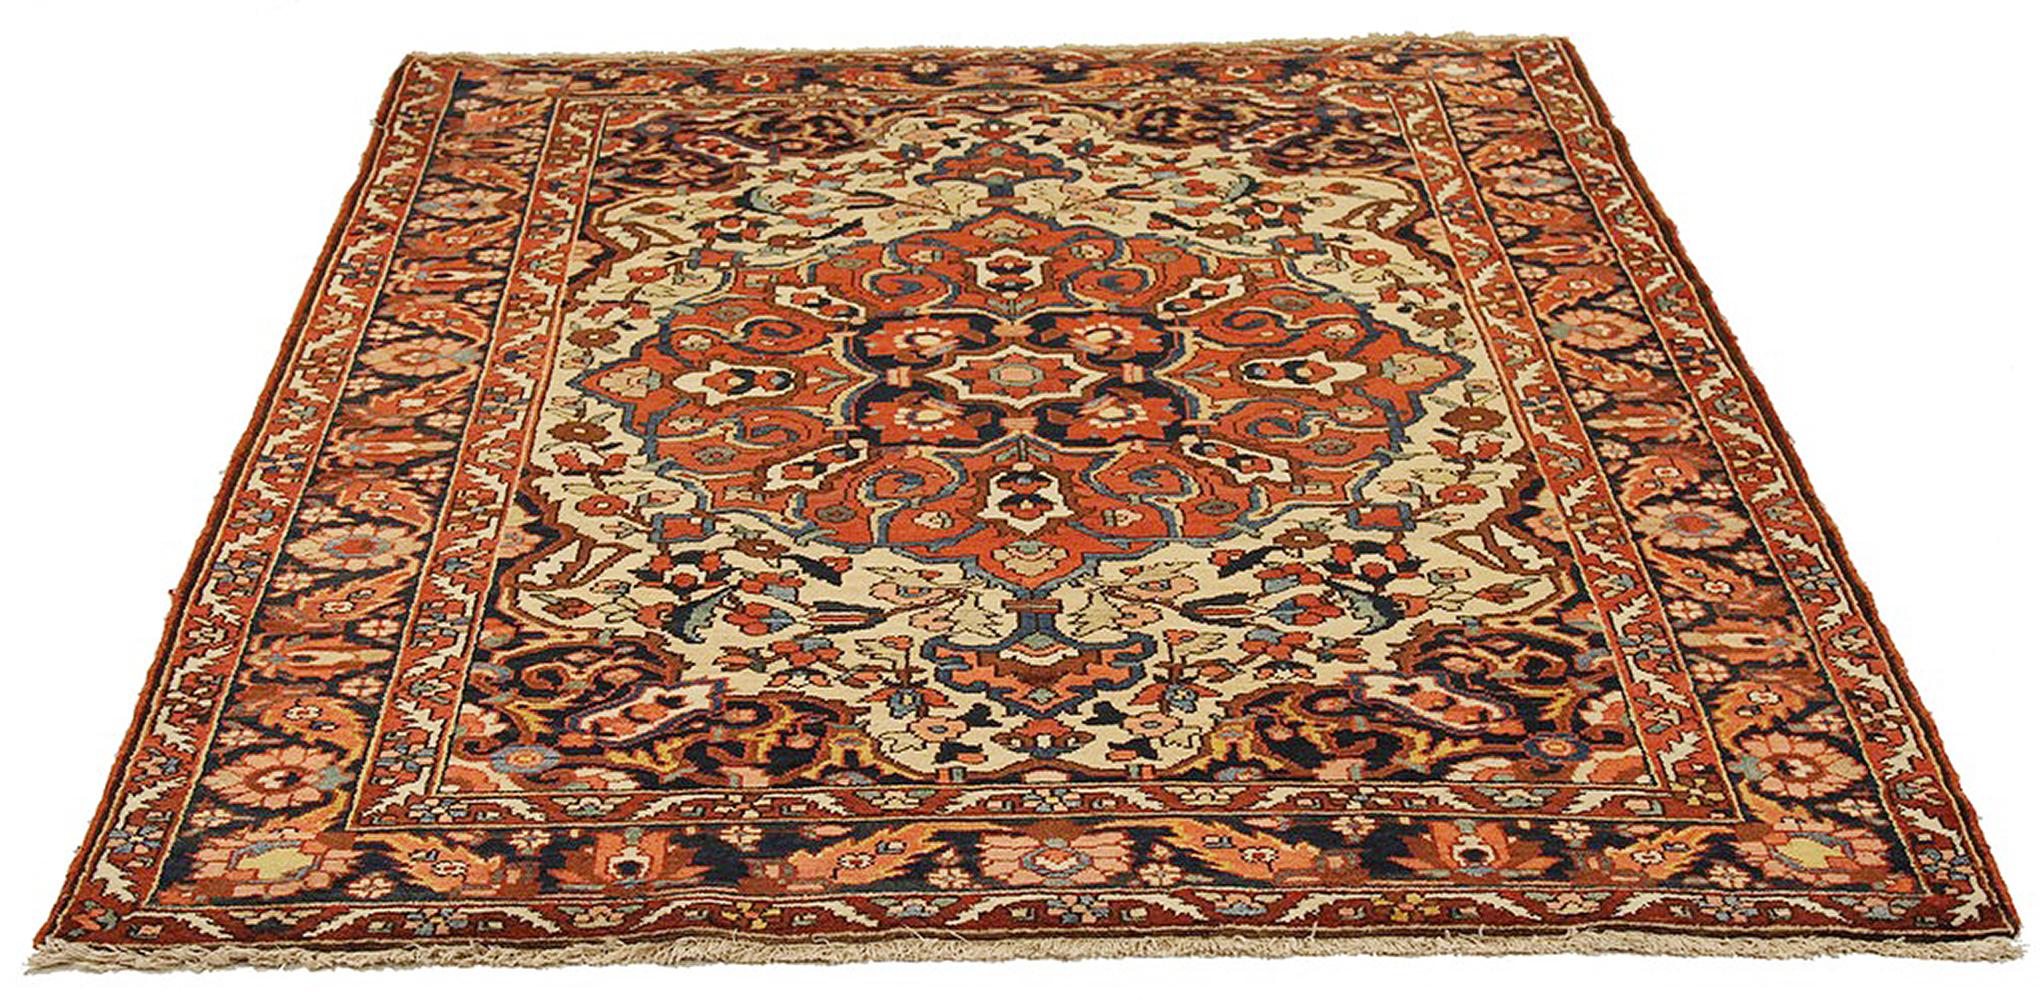 Antique Persian rug handwoven from the finest sheep’s wool and colored with all-natural vegetable dyes that are safe for humans and pets. It’s a traditional Bakhtiar design highlighted by an ivory field filled with floral details in brown, navy, and